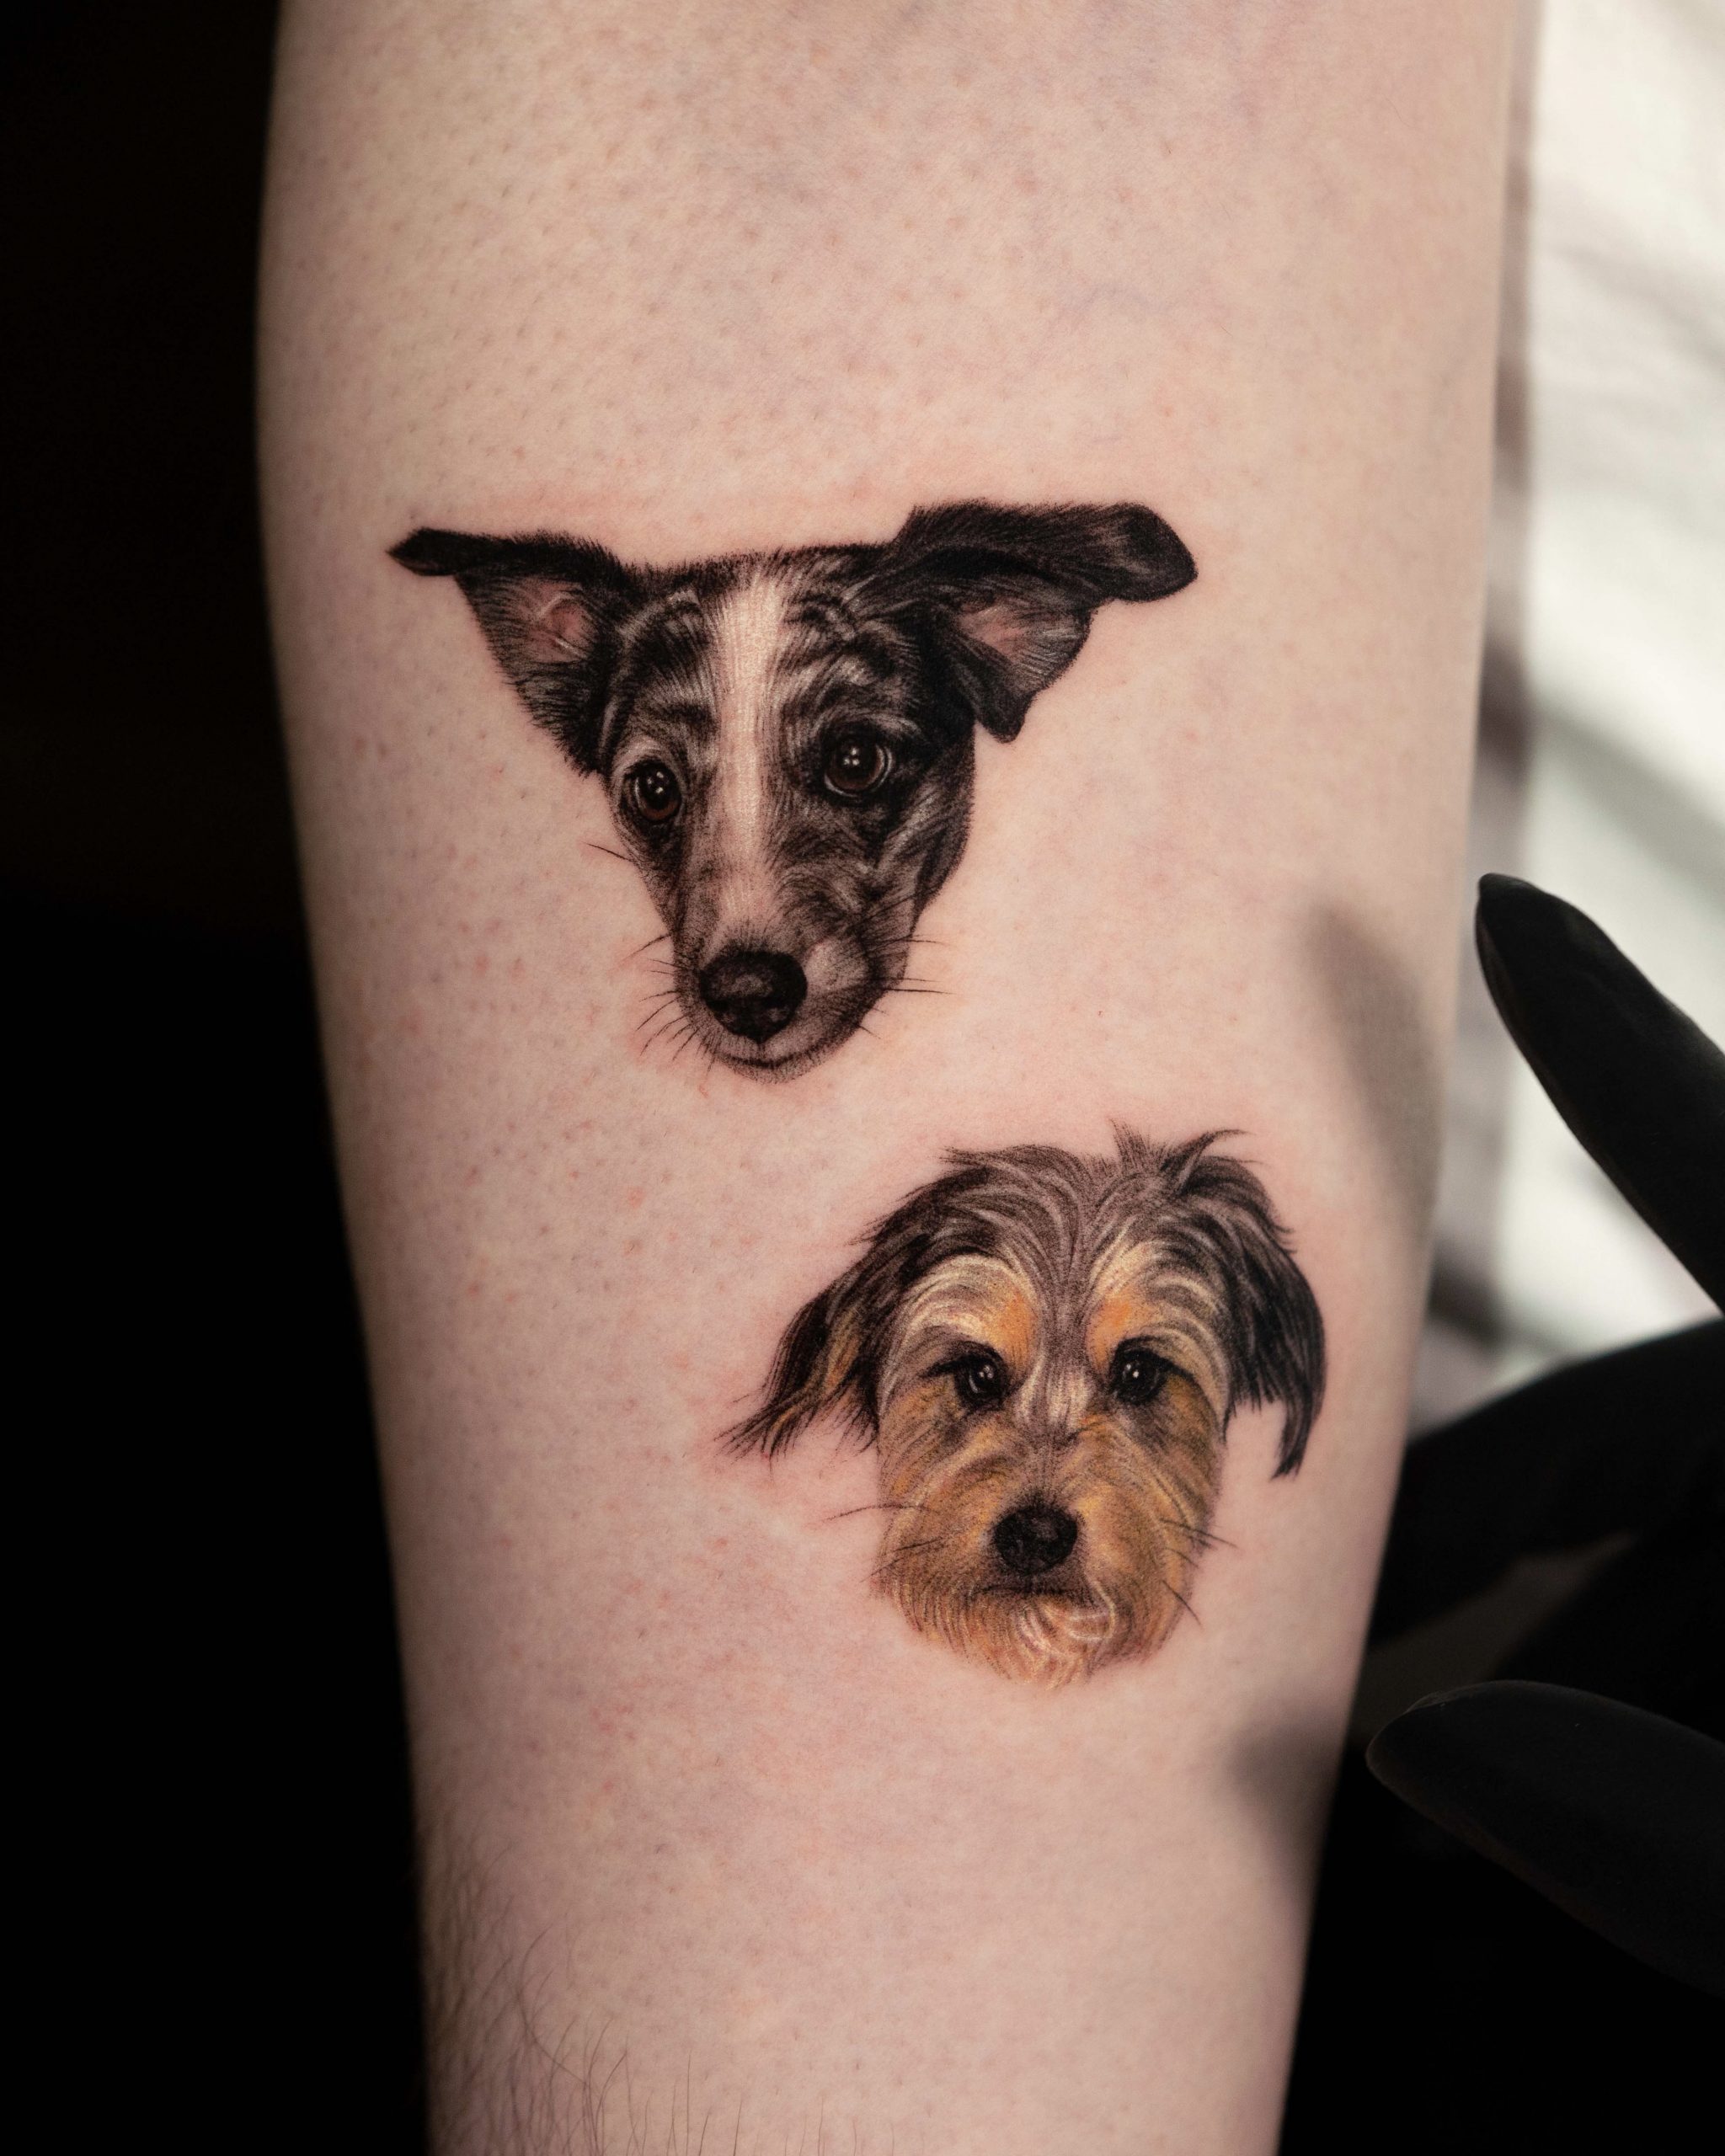 No more dog tattoo: Pet tattooing banned in New York - Rover Blog